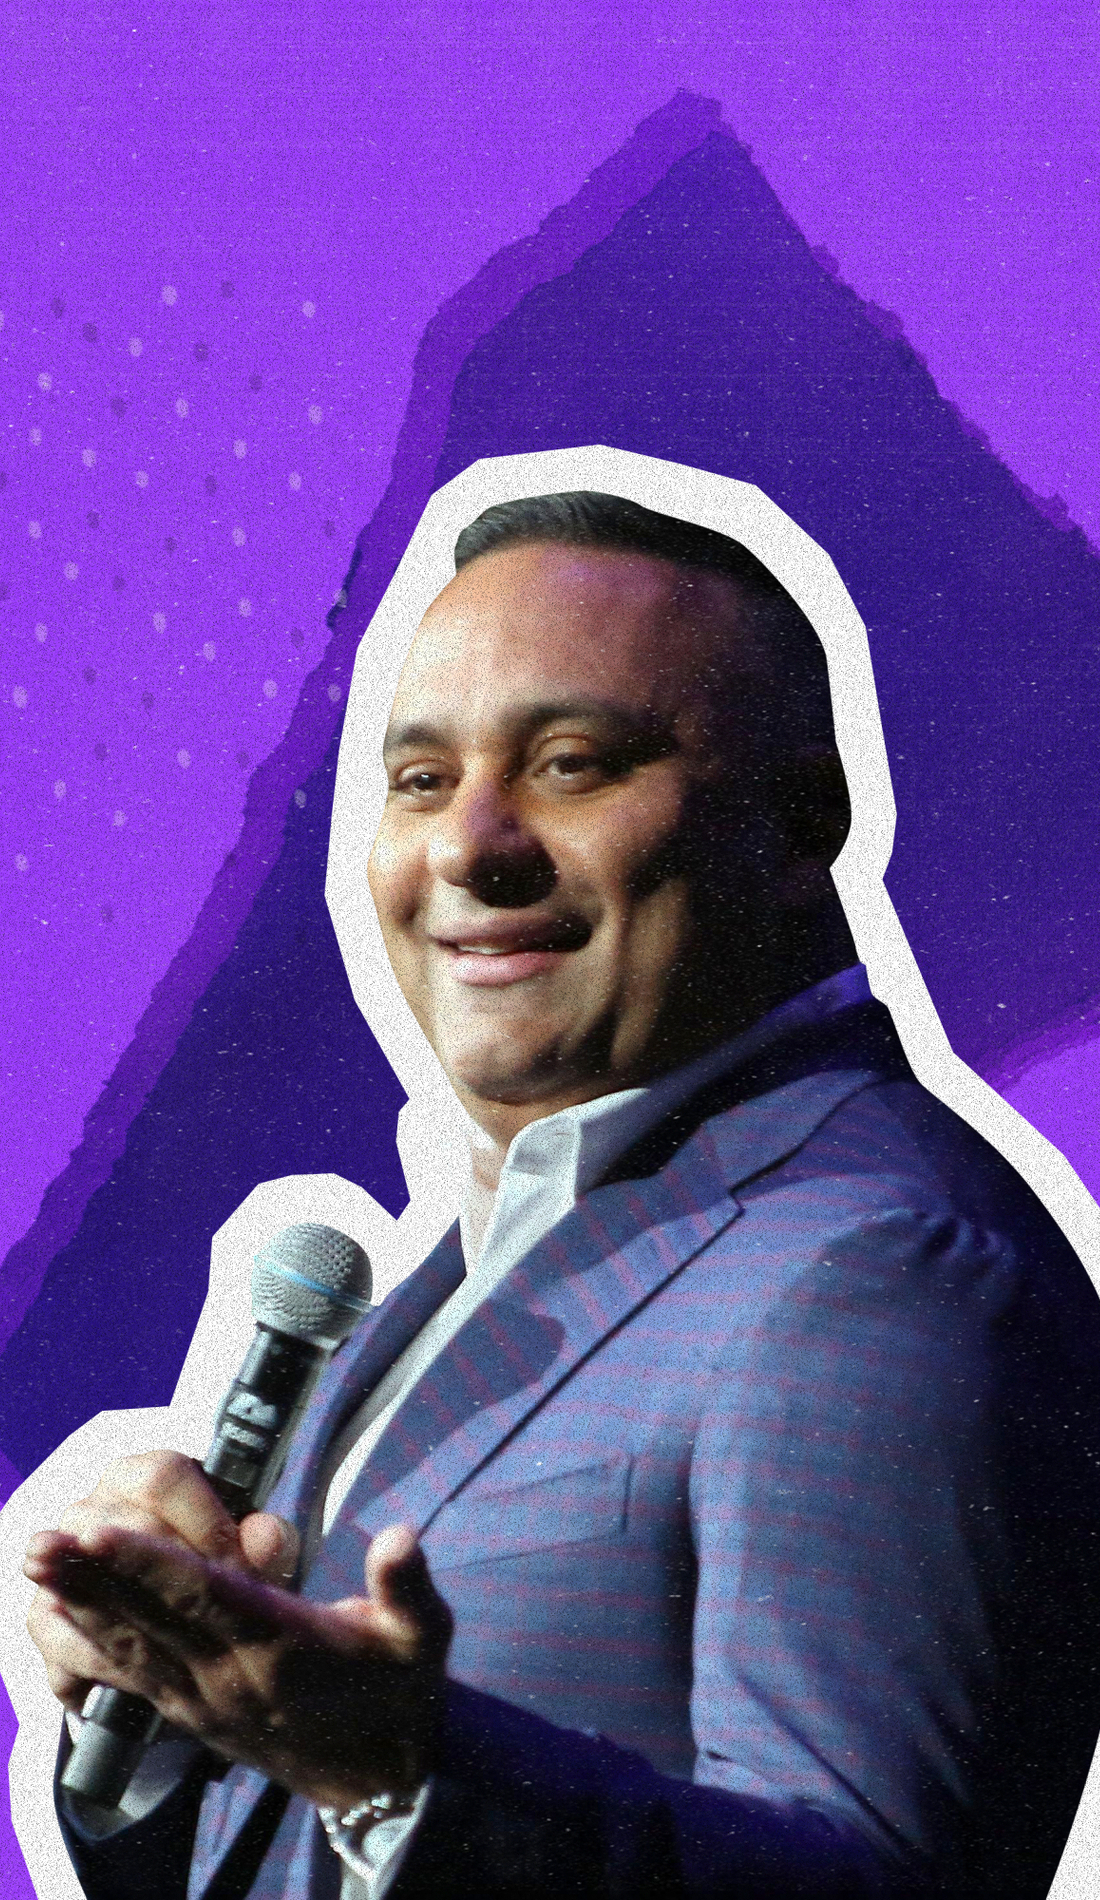 A Russell Peters live event